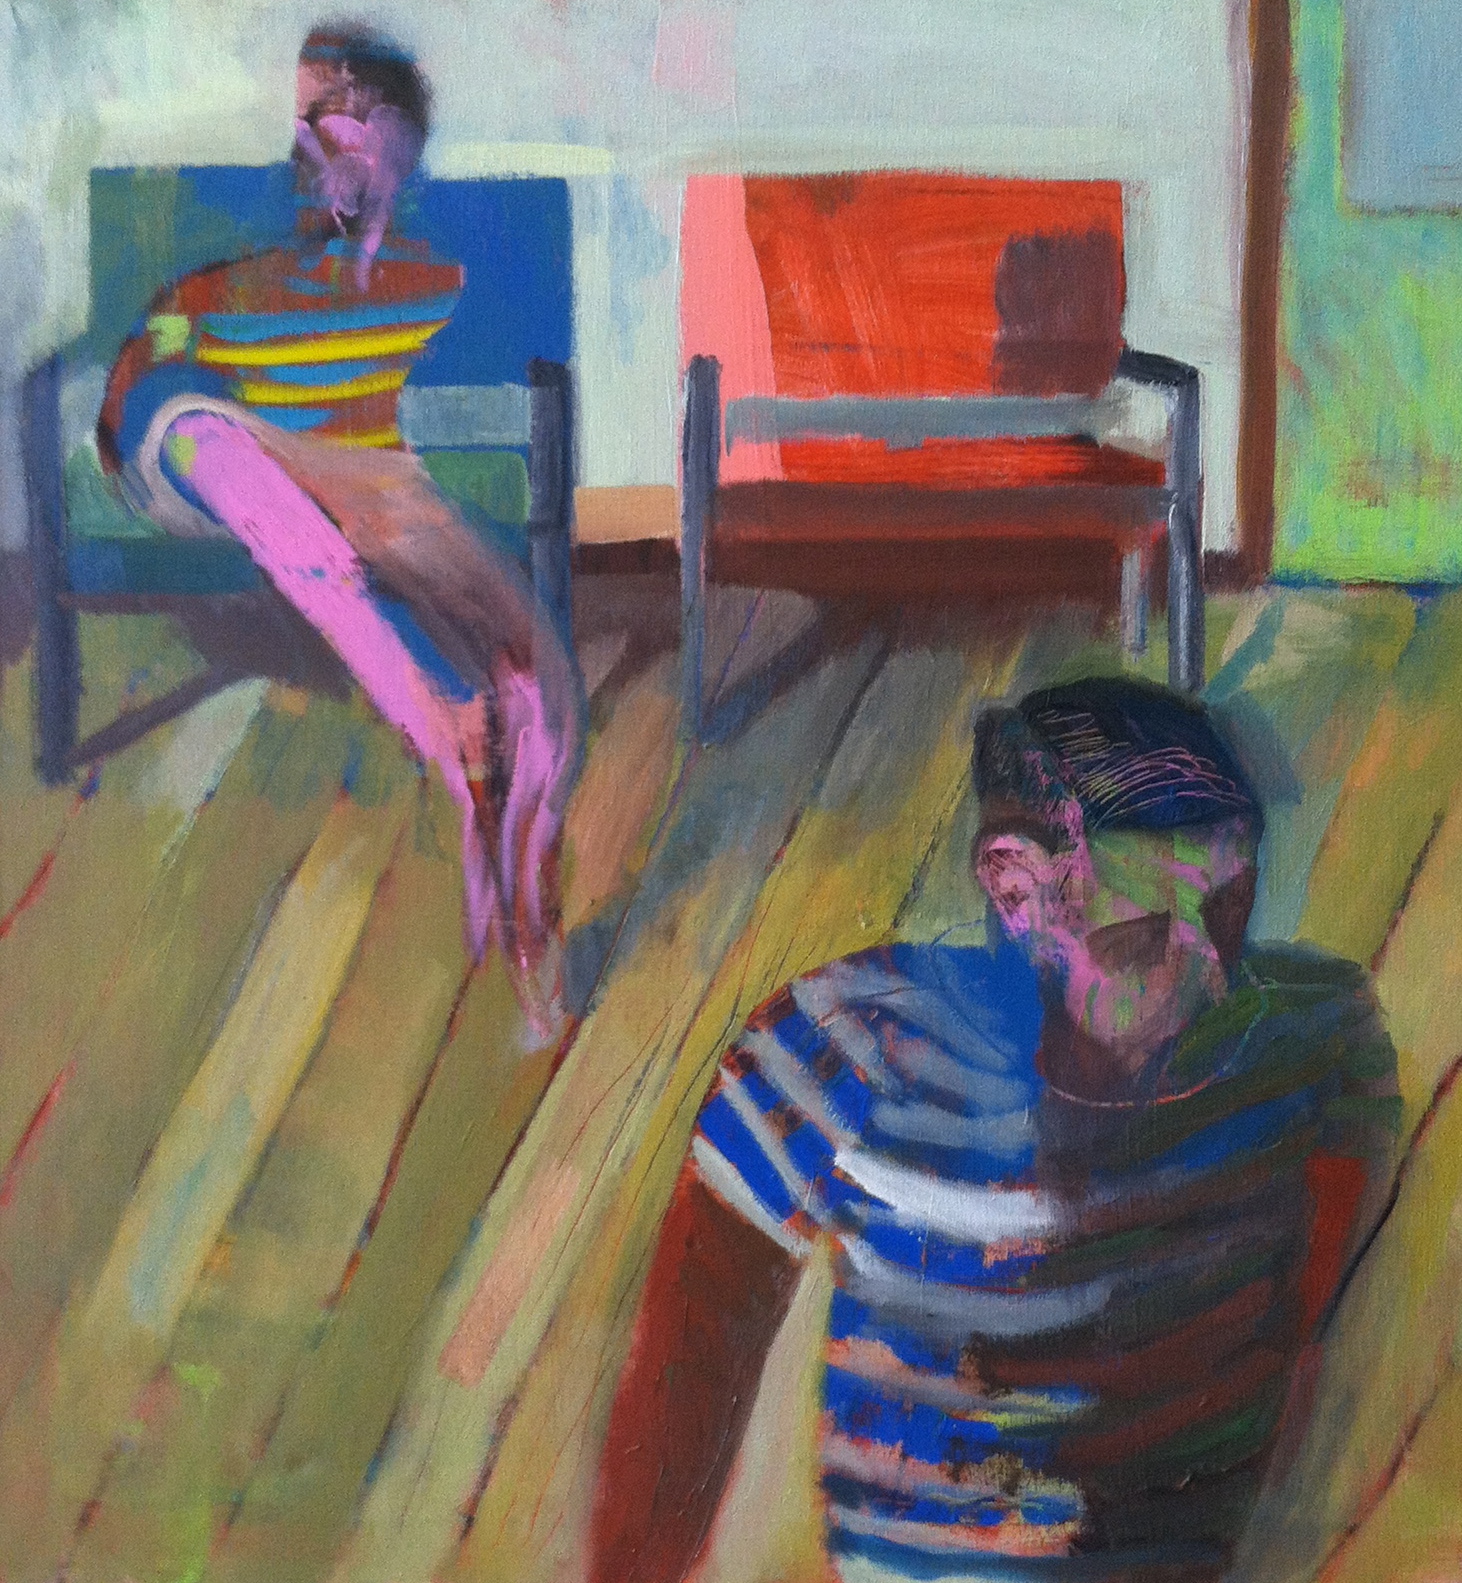  The room, acrylic and oil on canvas, 30x32 inches, 2014 